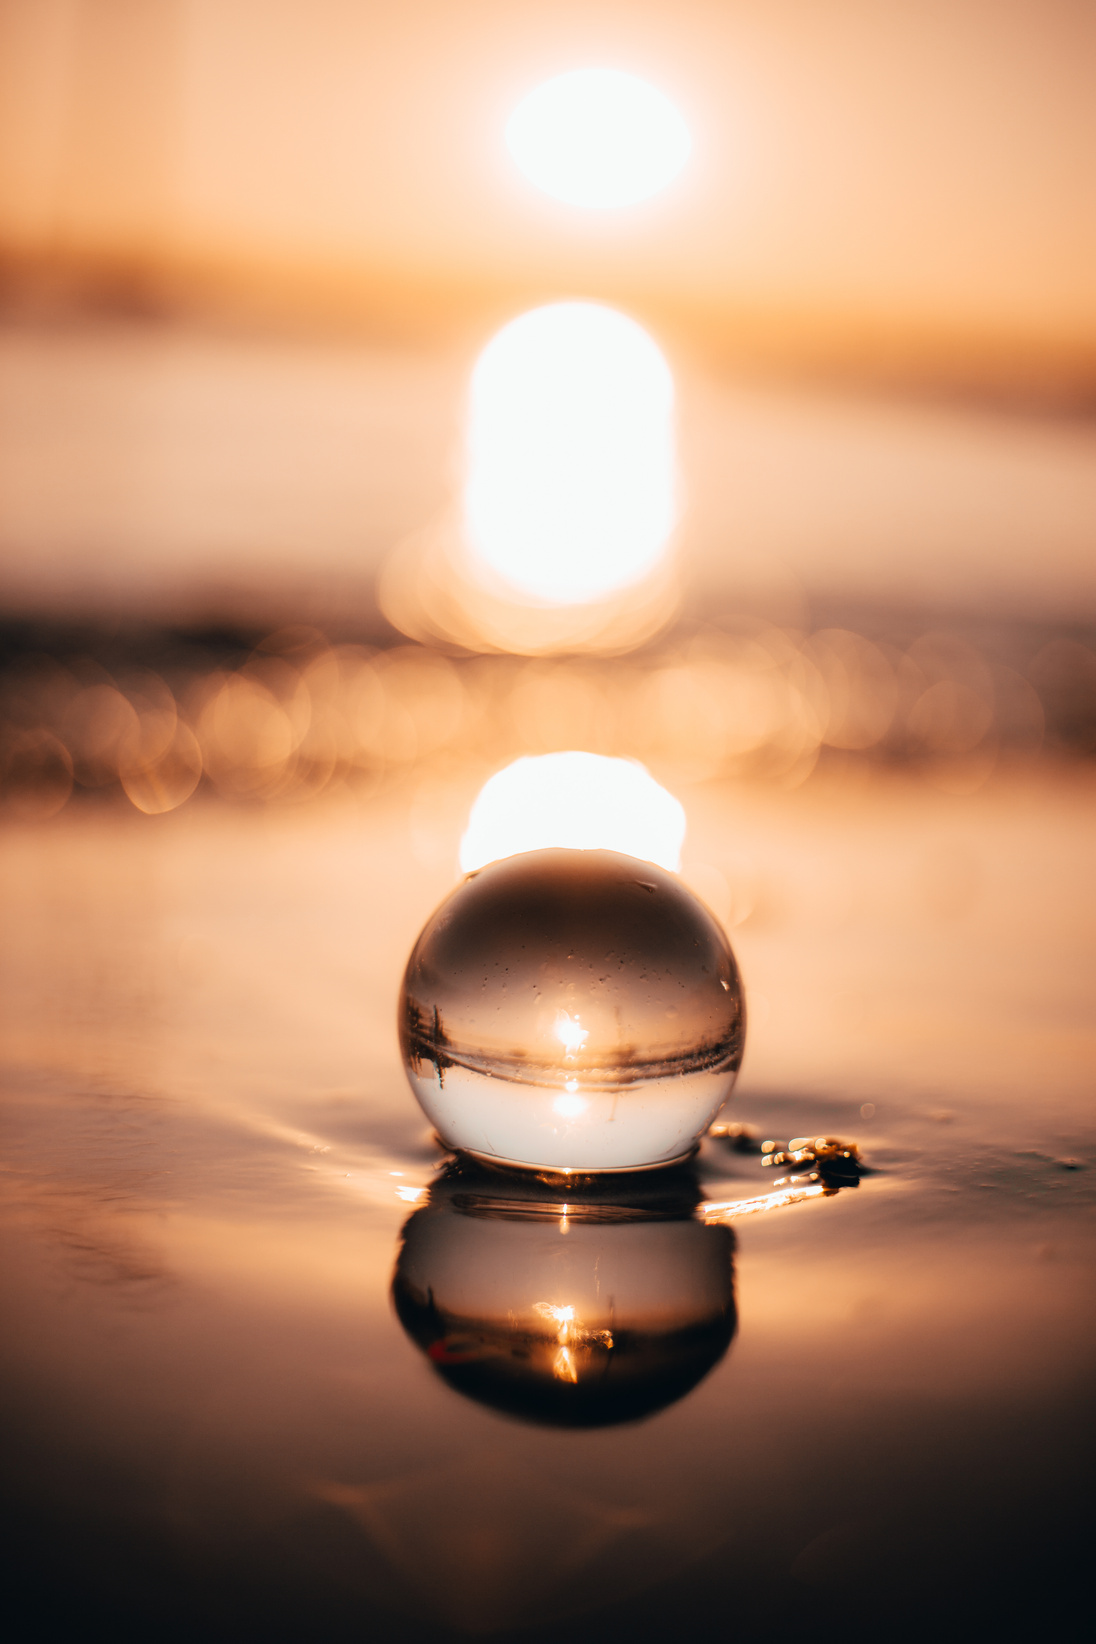 Glass ball on calm lake water surface in evening